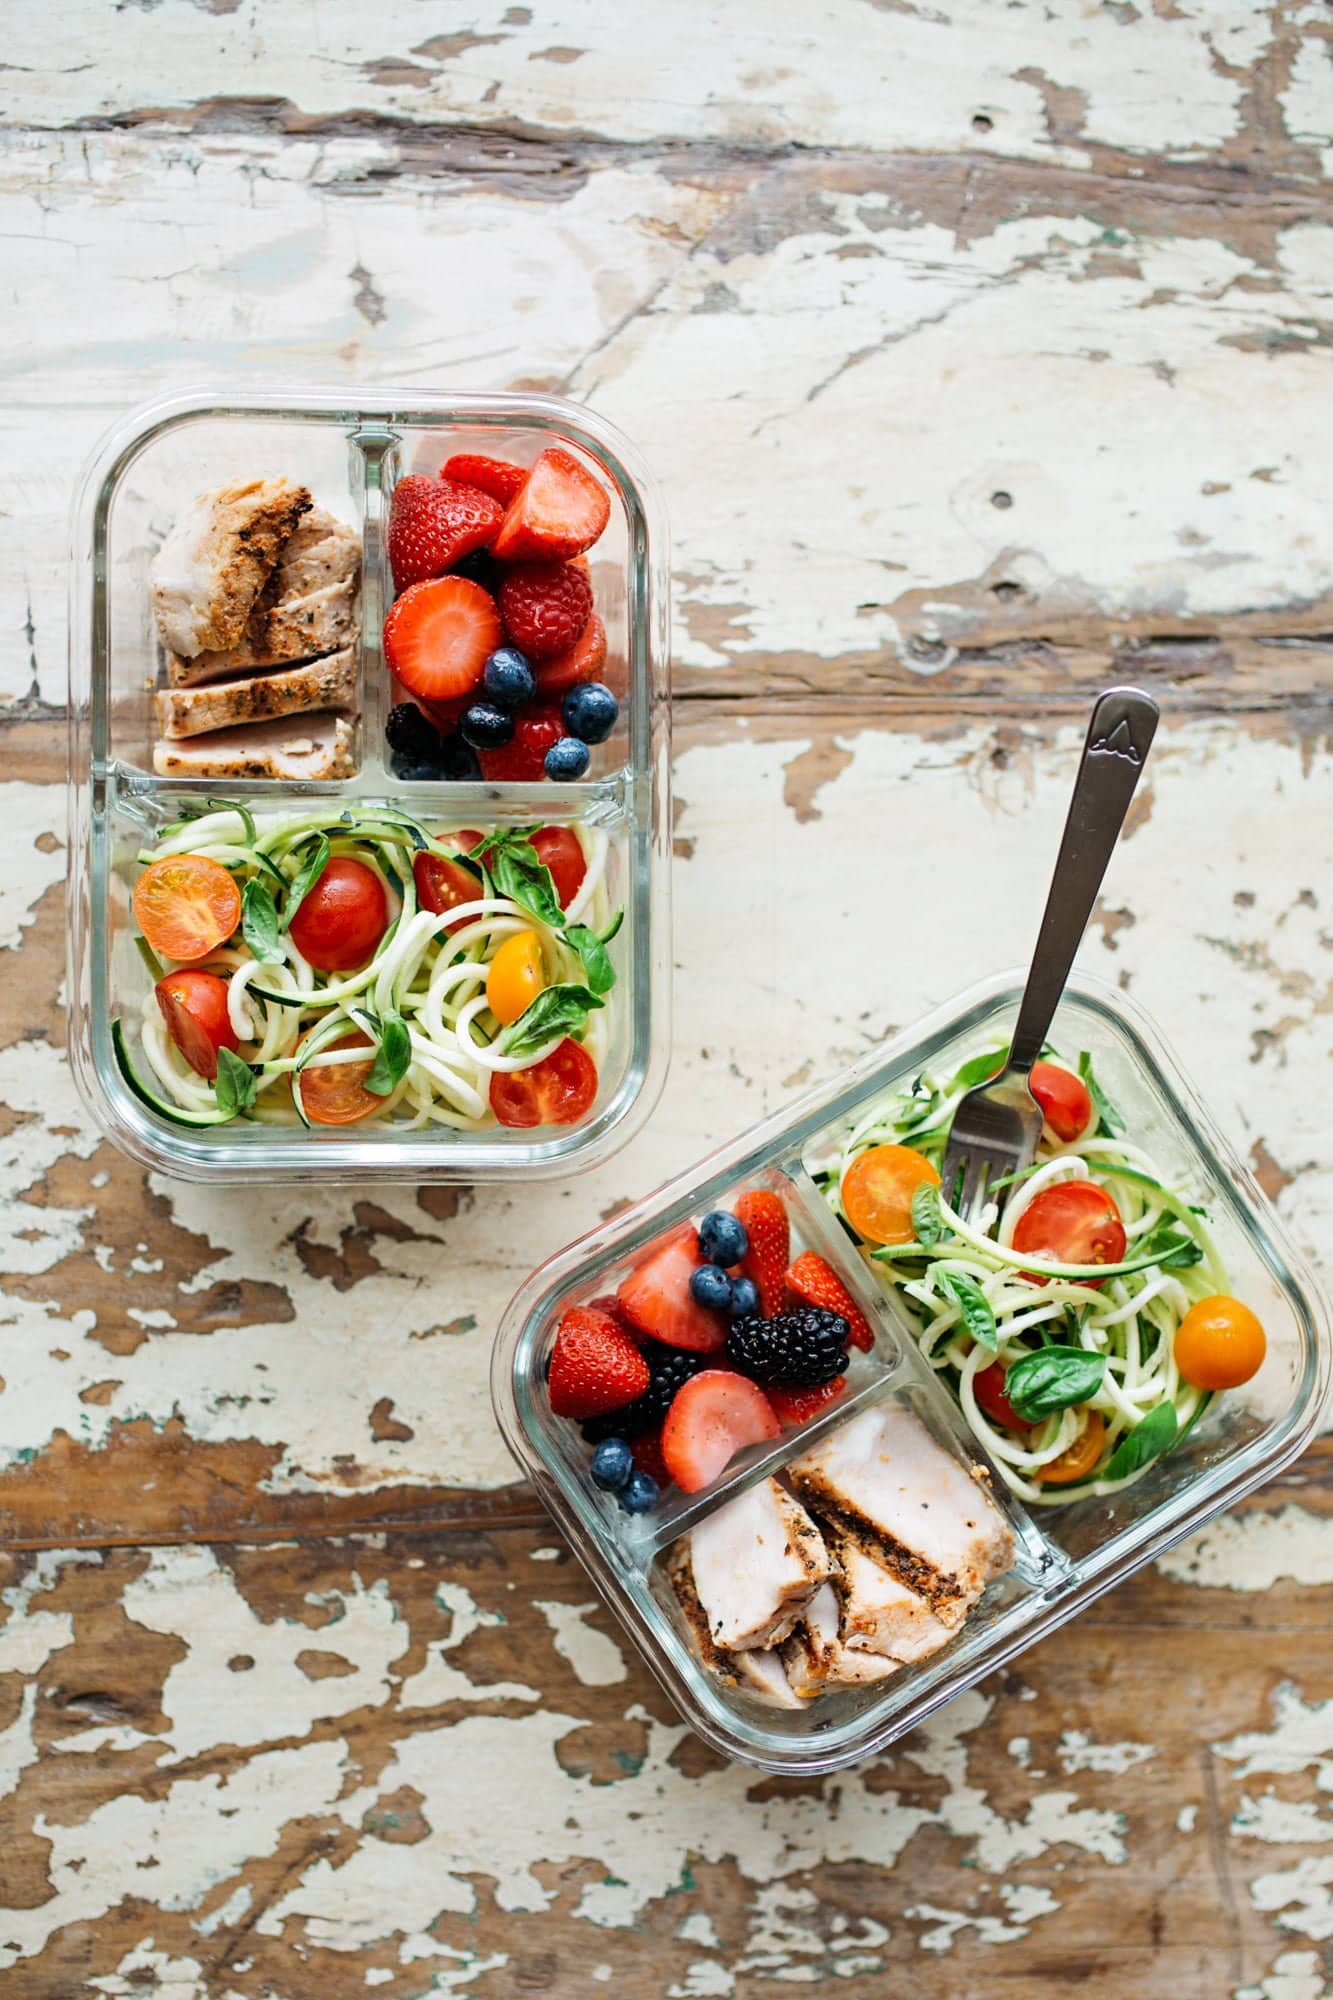 Two divided glass containers filled with a meal prep lunch - chicken, berries, and vegetables.